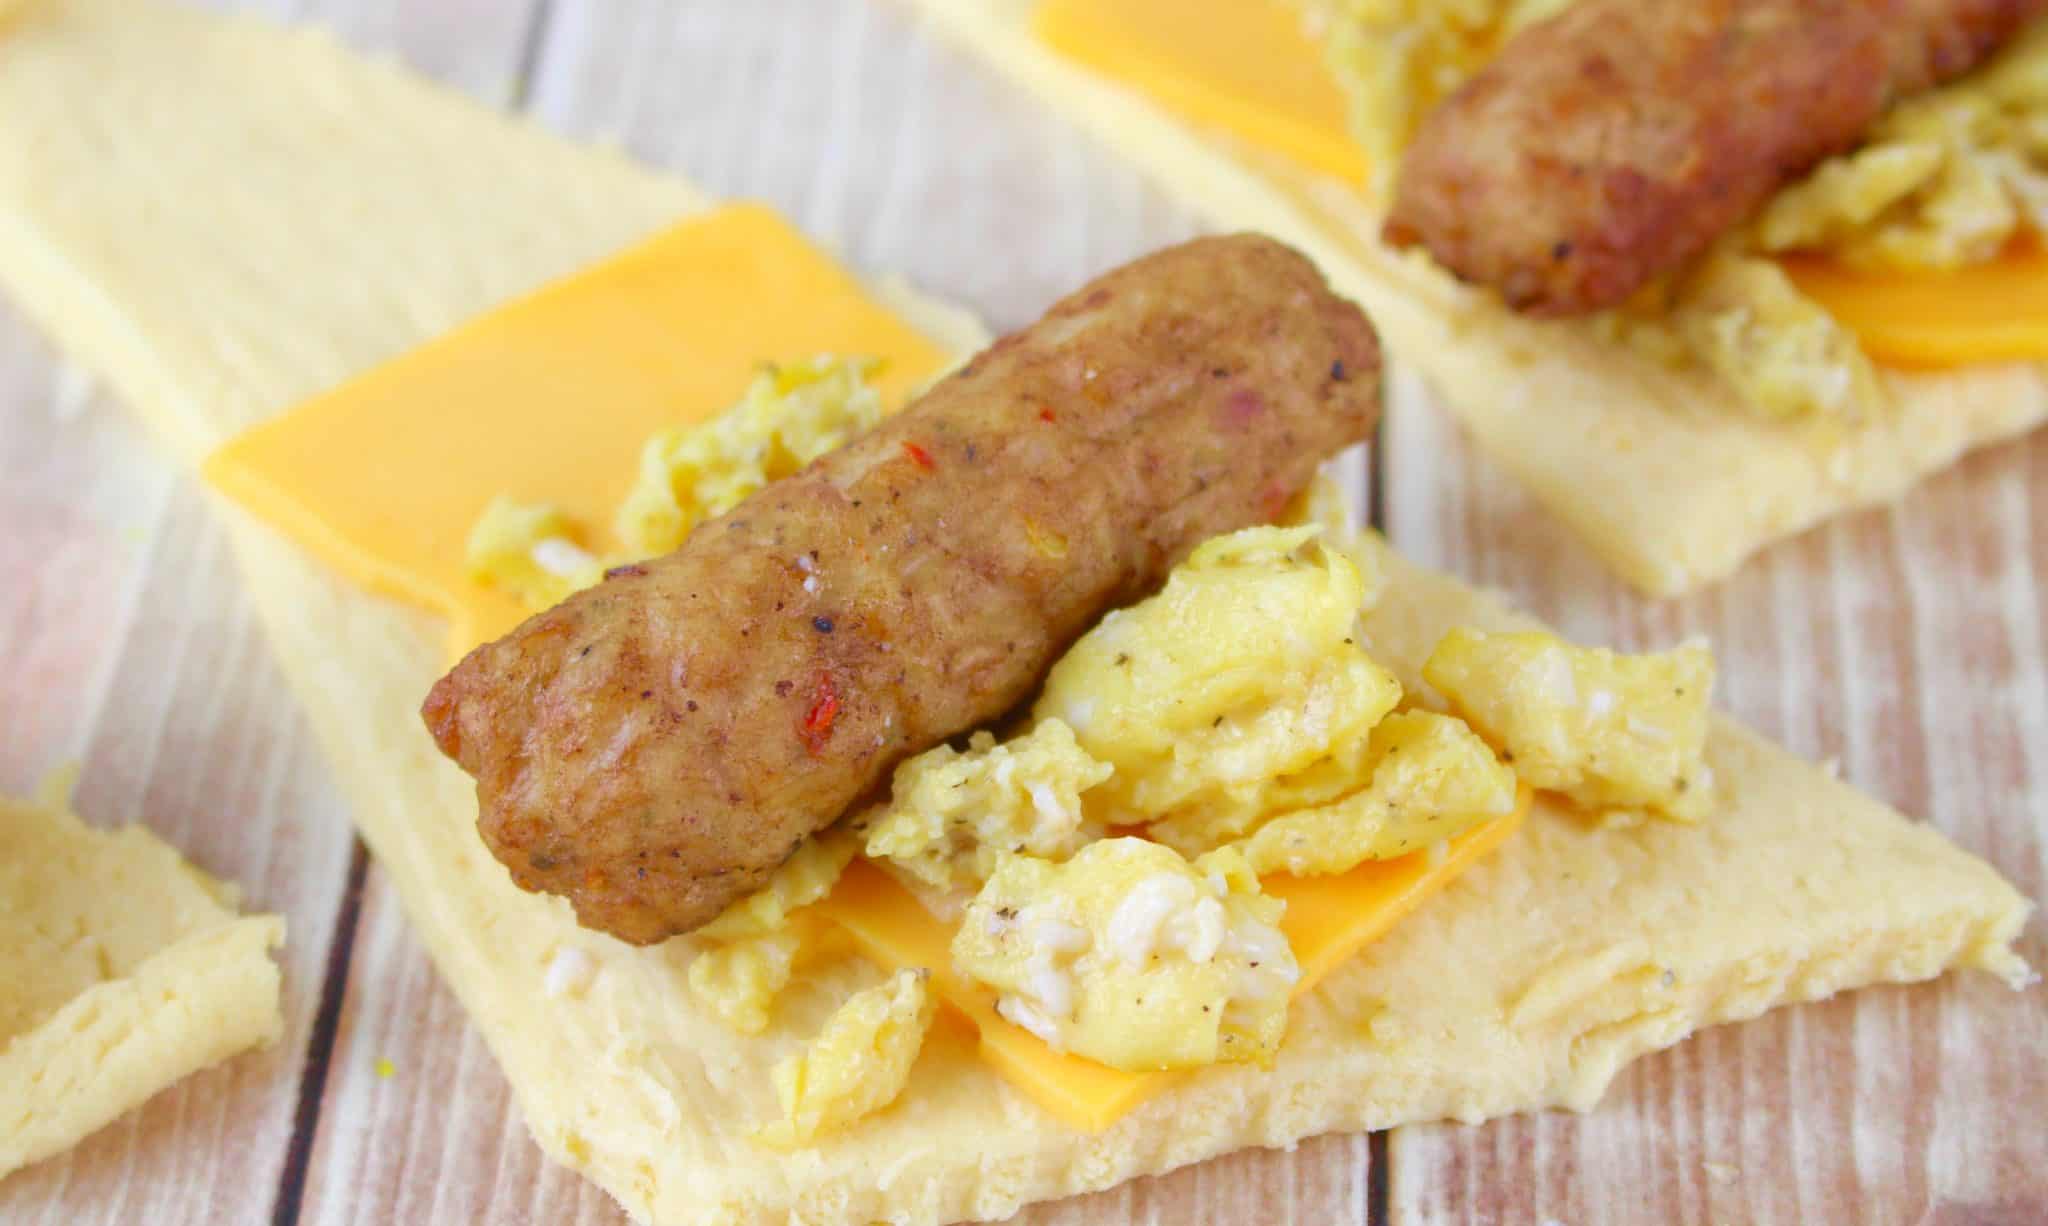 crescent roll, cheese, scrambled eggs and sausage link on a piece of crescent roll.